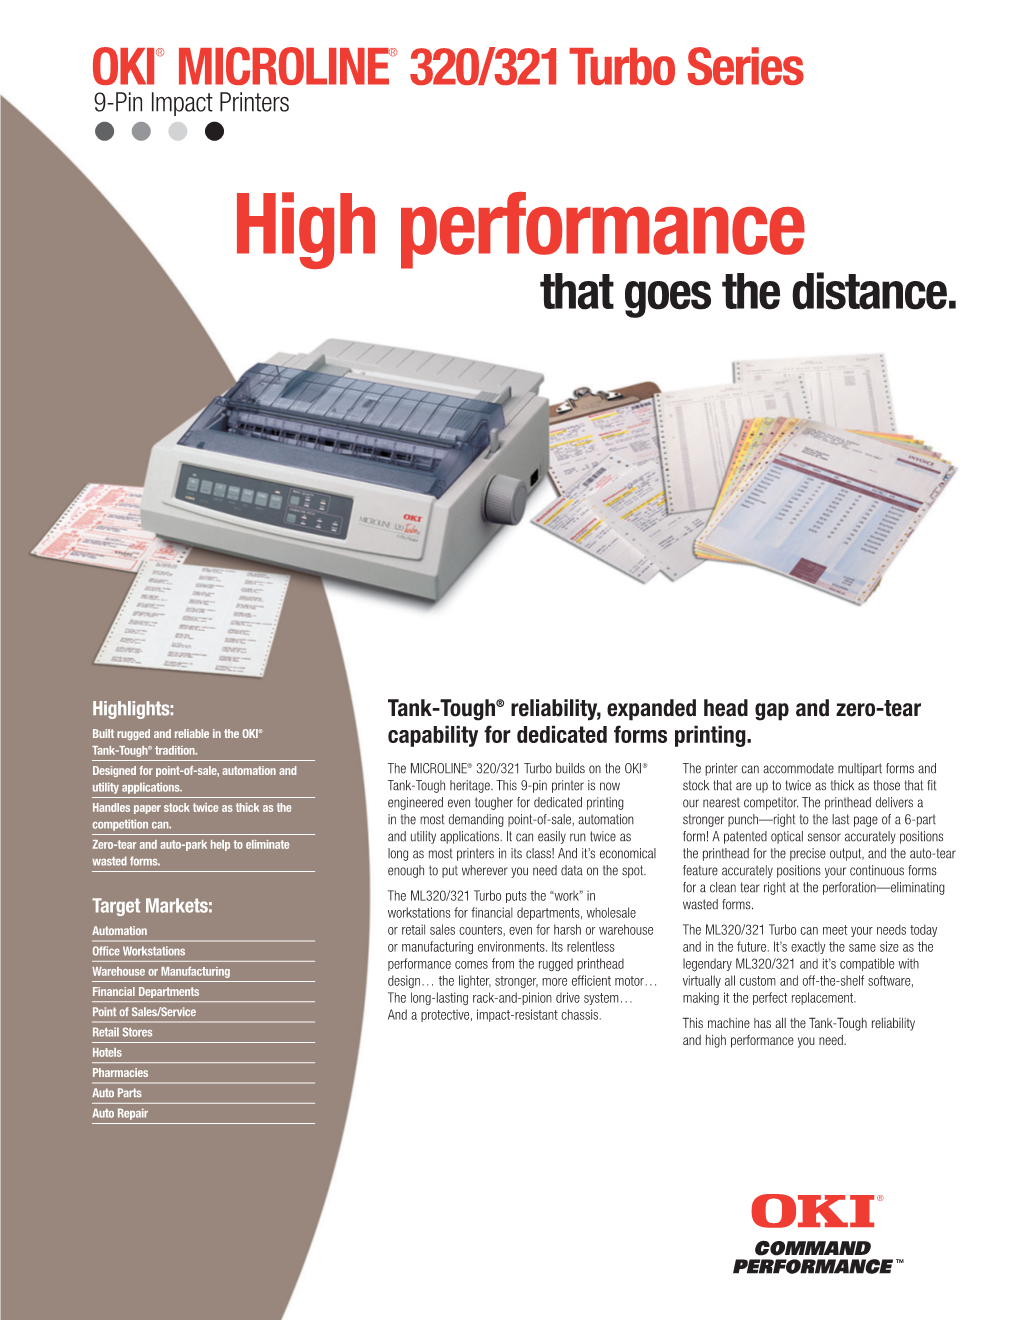 OKI® MICROLINE® 320/321Turbo Series 9-Pin Impact Printers High Performance That Goes the Distance